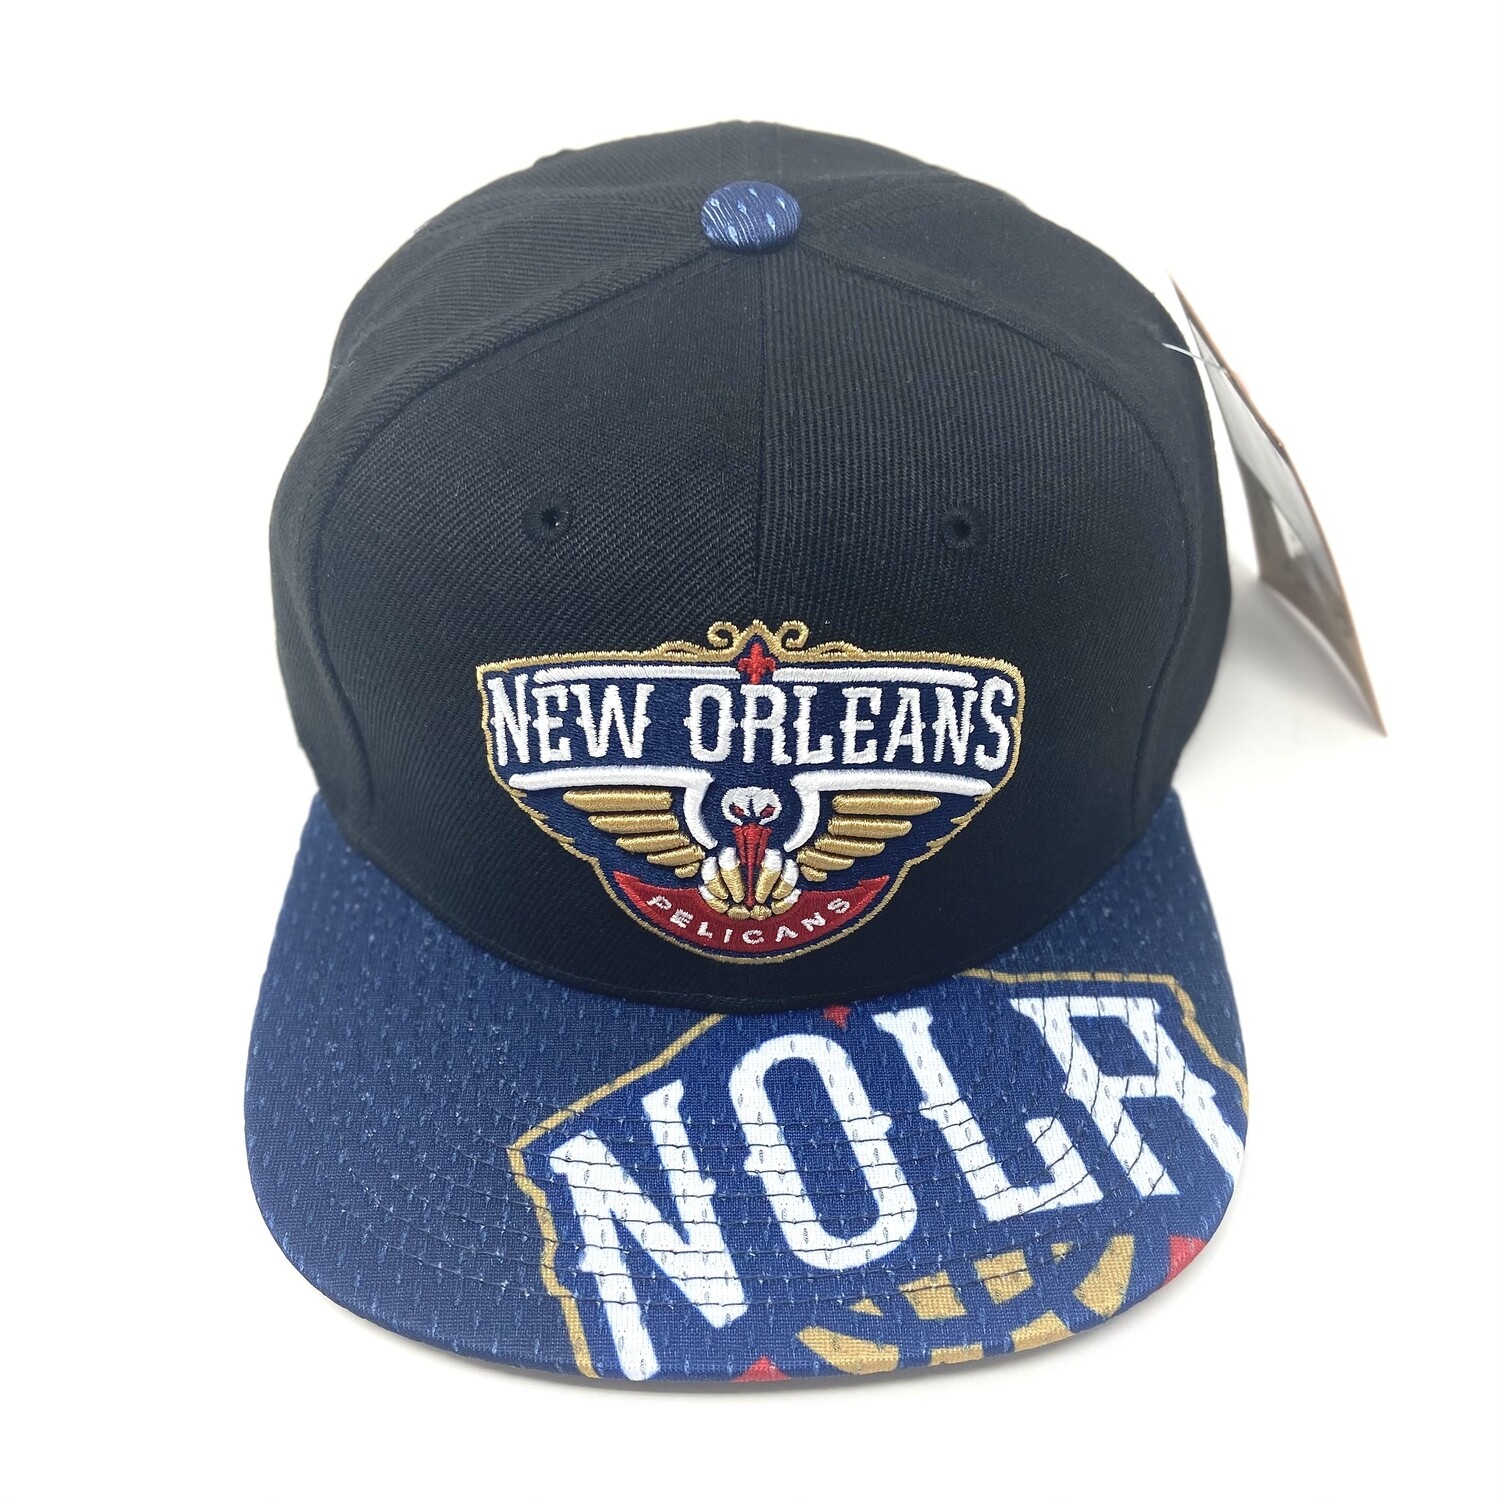 MITCHELL & NESS - Accessories - New Orleans Pelicans 2.0 Snapback - Blue